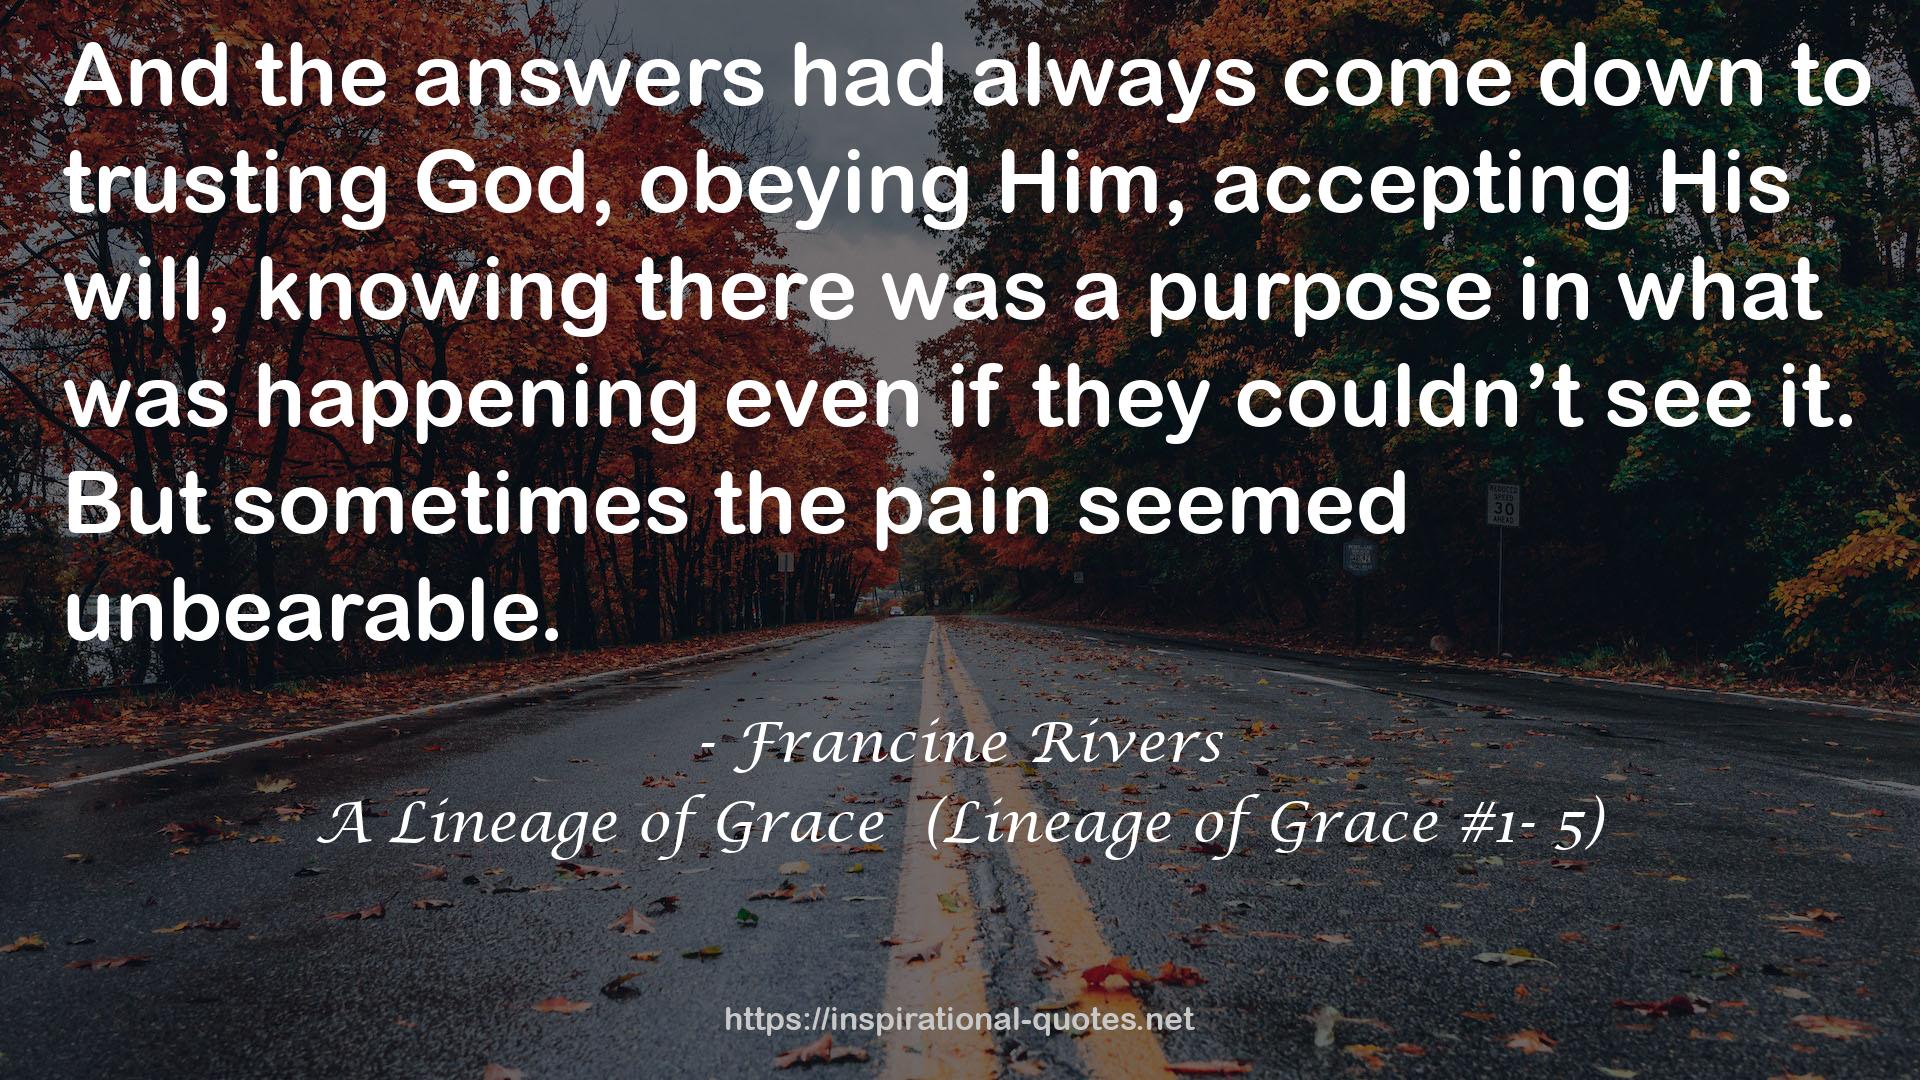 A Lineage of Grace  (Lineage of Grace #1- 5) QUOTES